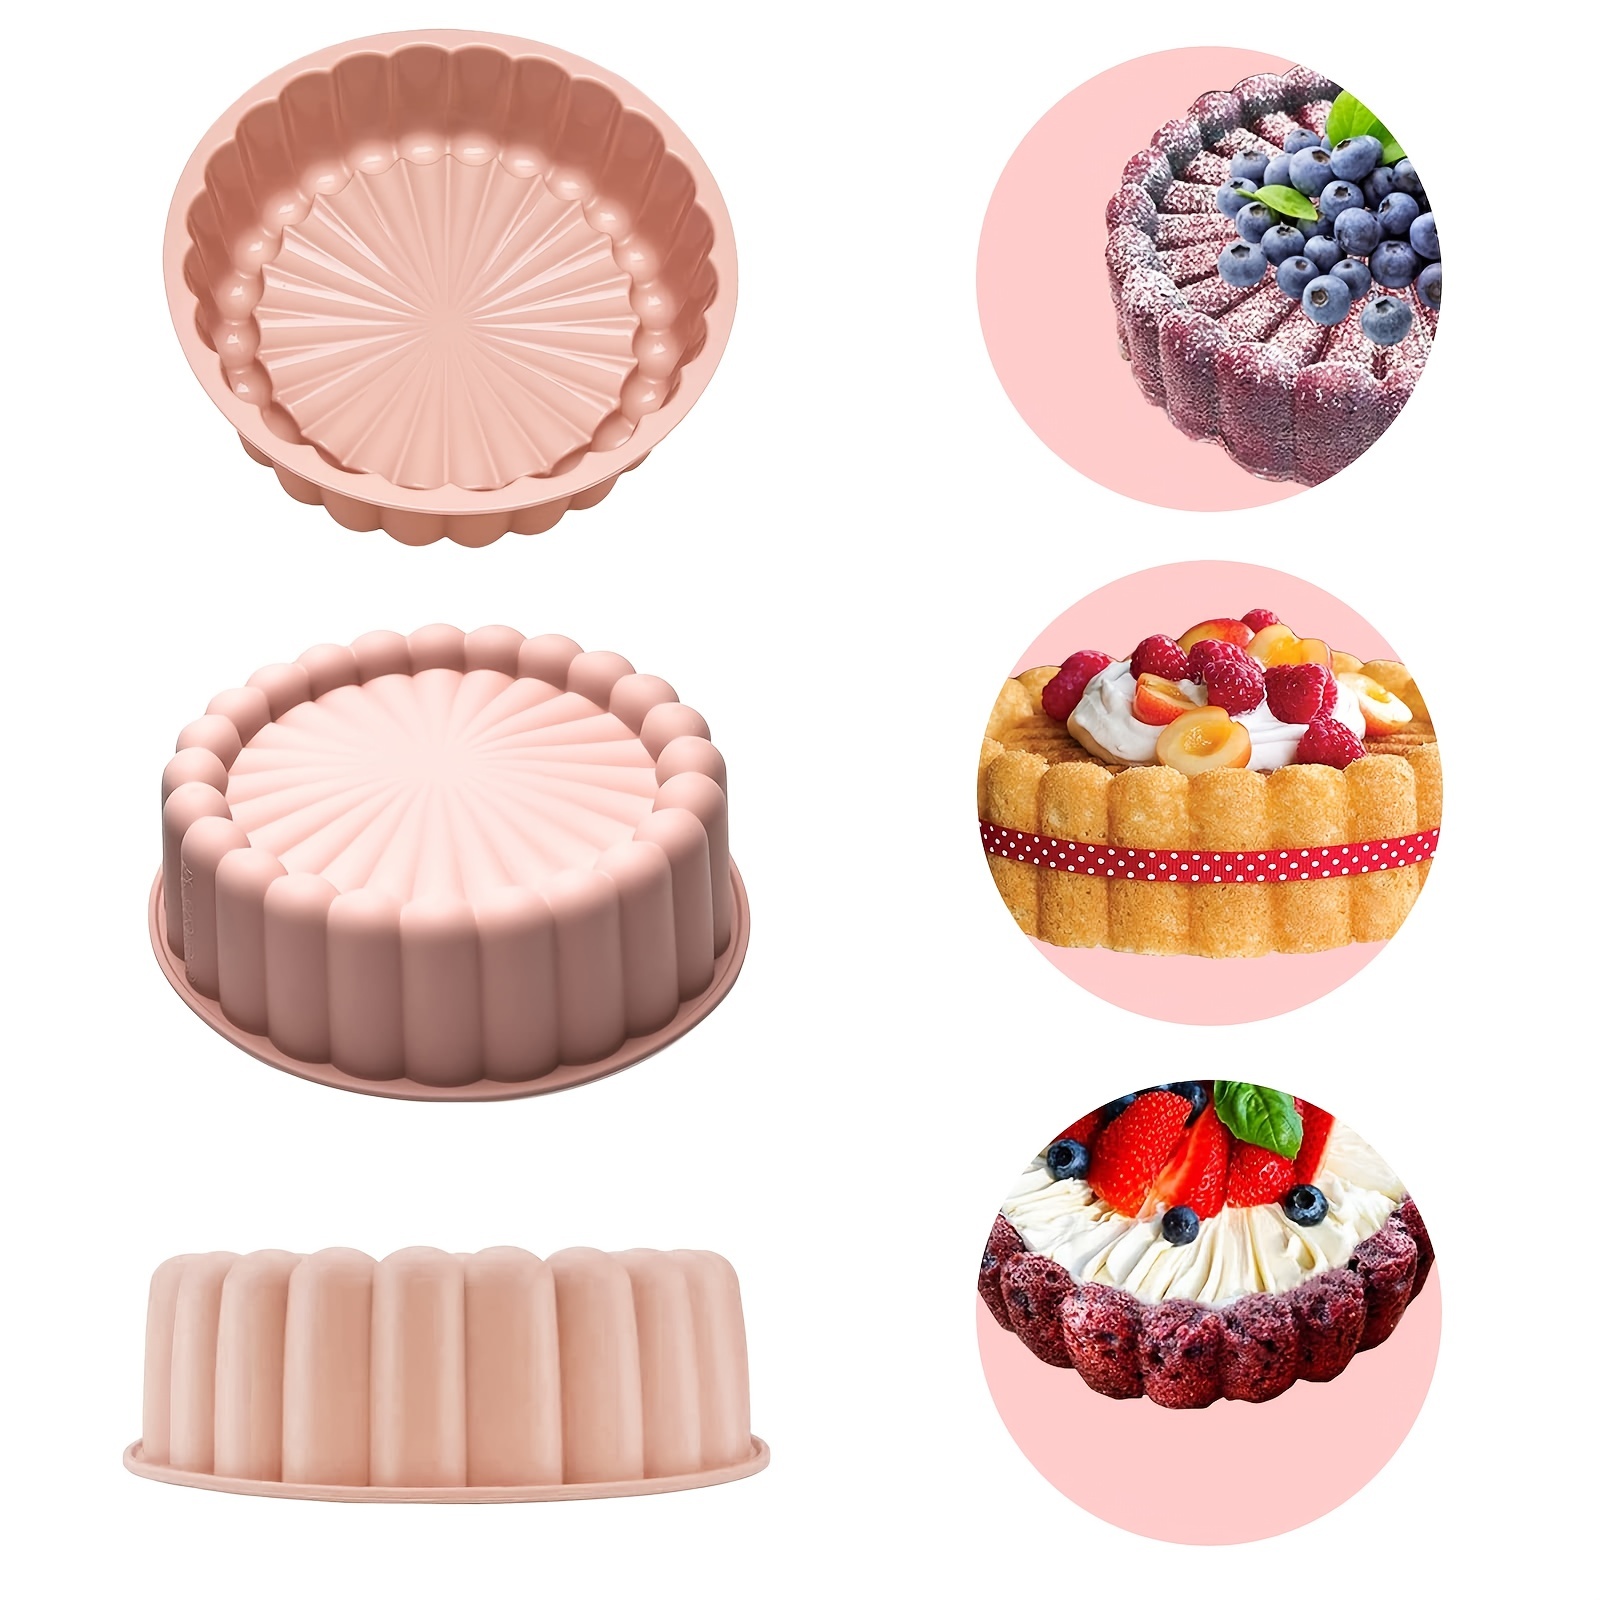 Silikomart 7-Inch Silicone Classic Collection Cake Pan, Round